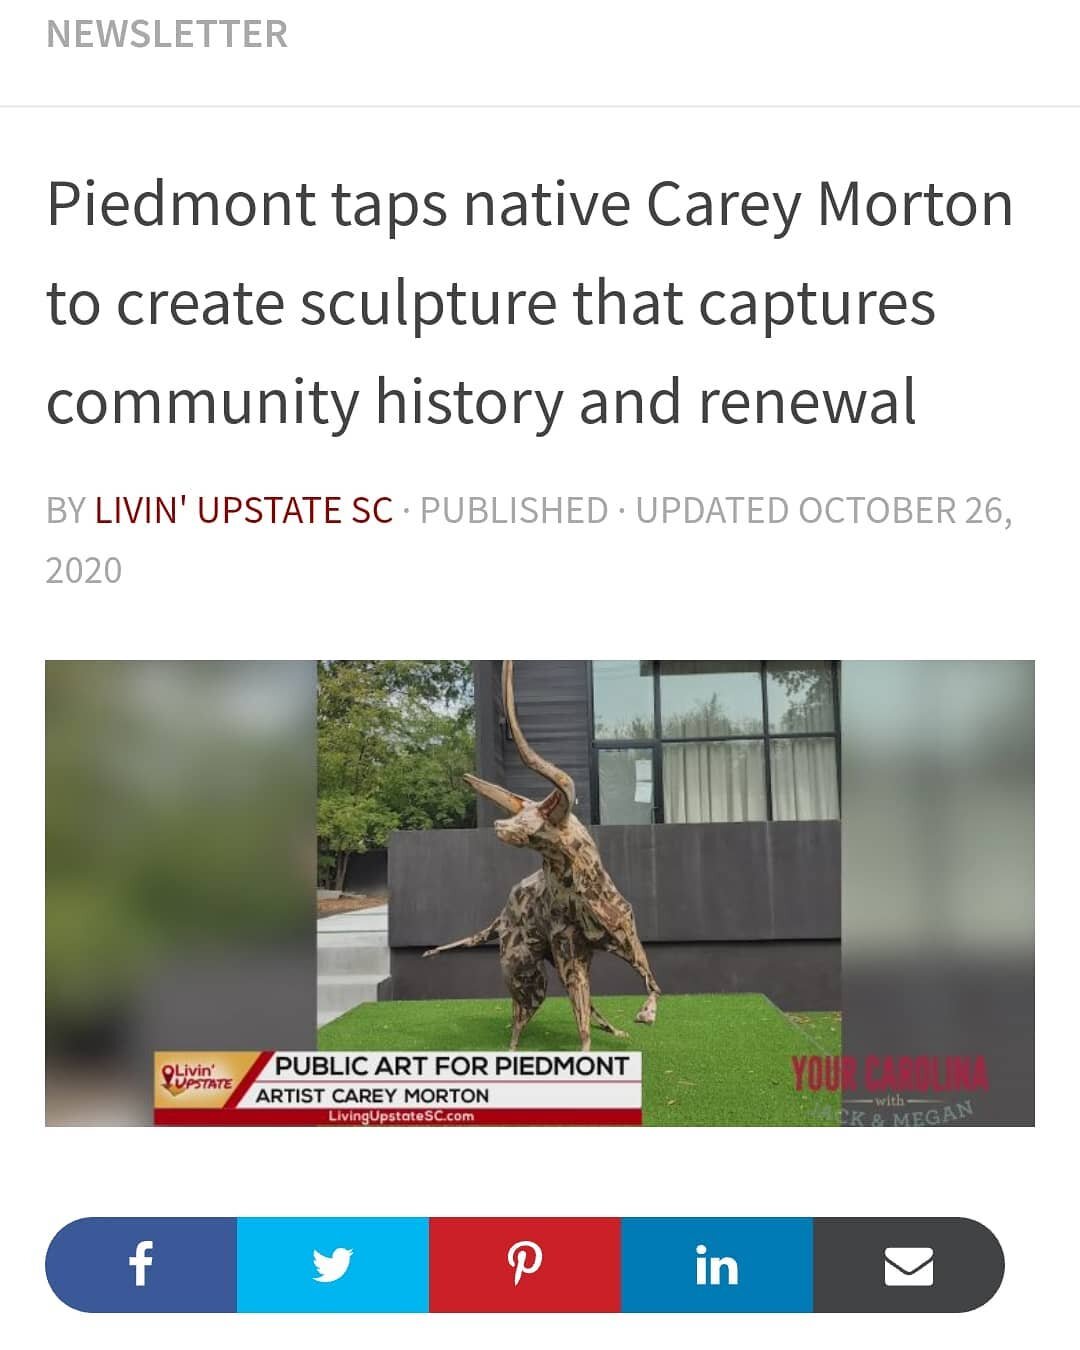 Big things happening in small town places. 
@livinupstatesc recently did a quick spotlight on some upcoming sculpture to happen in my home town of Piedmont SC. Stay tuned for more news about the piece. Big thanks to @livinupstatesc and @jamarcusgasto